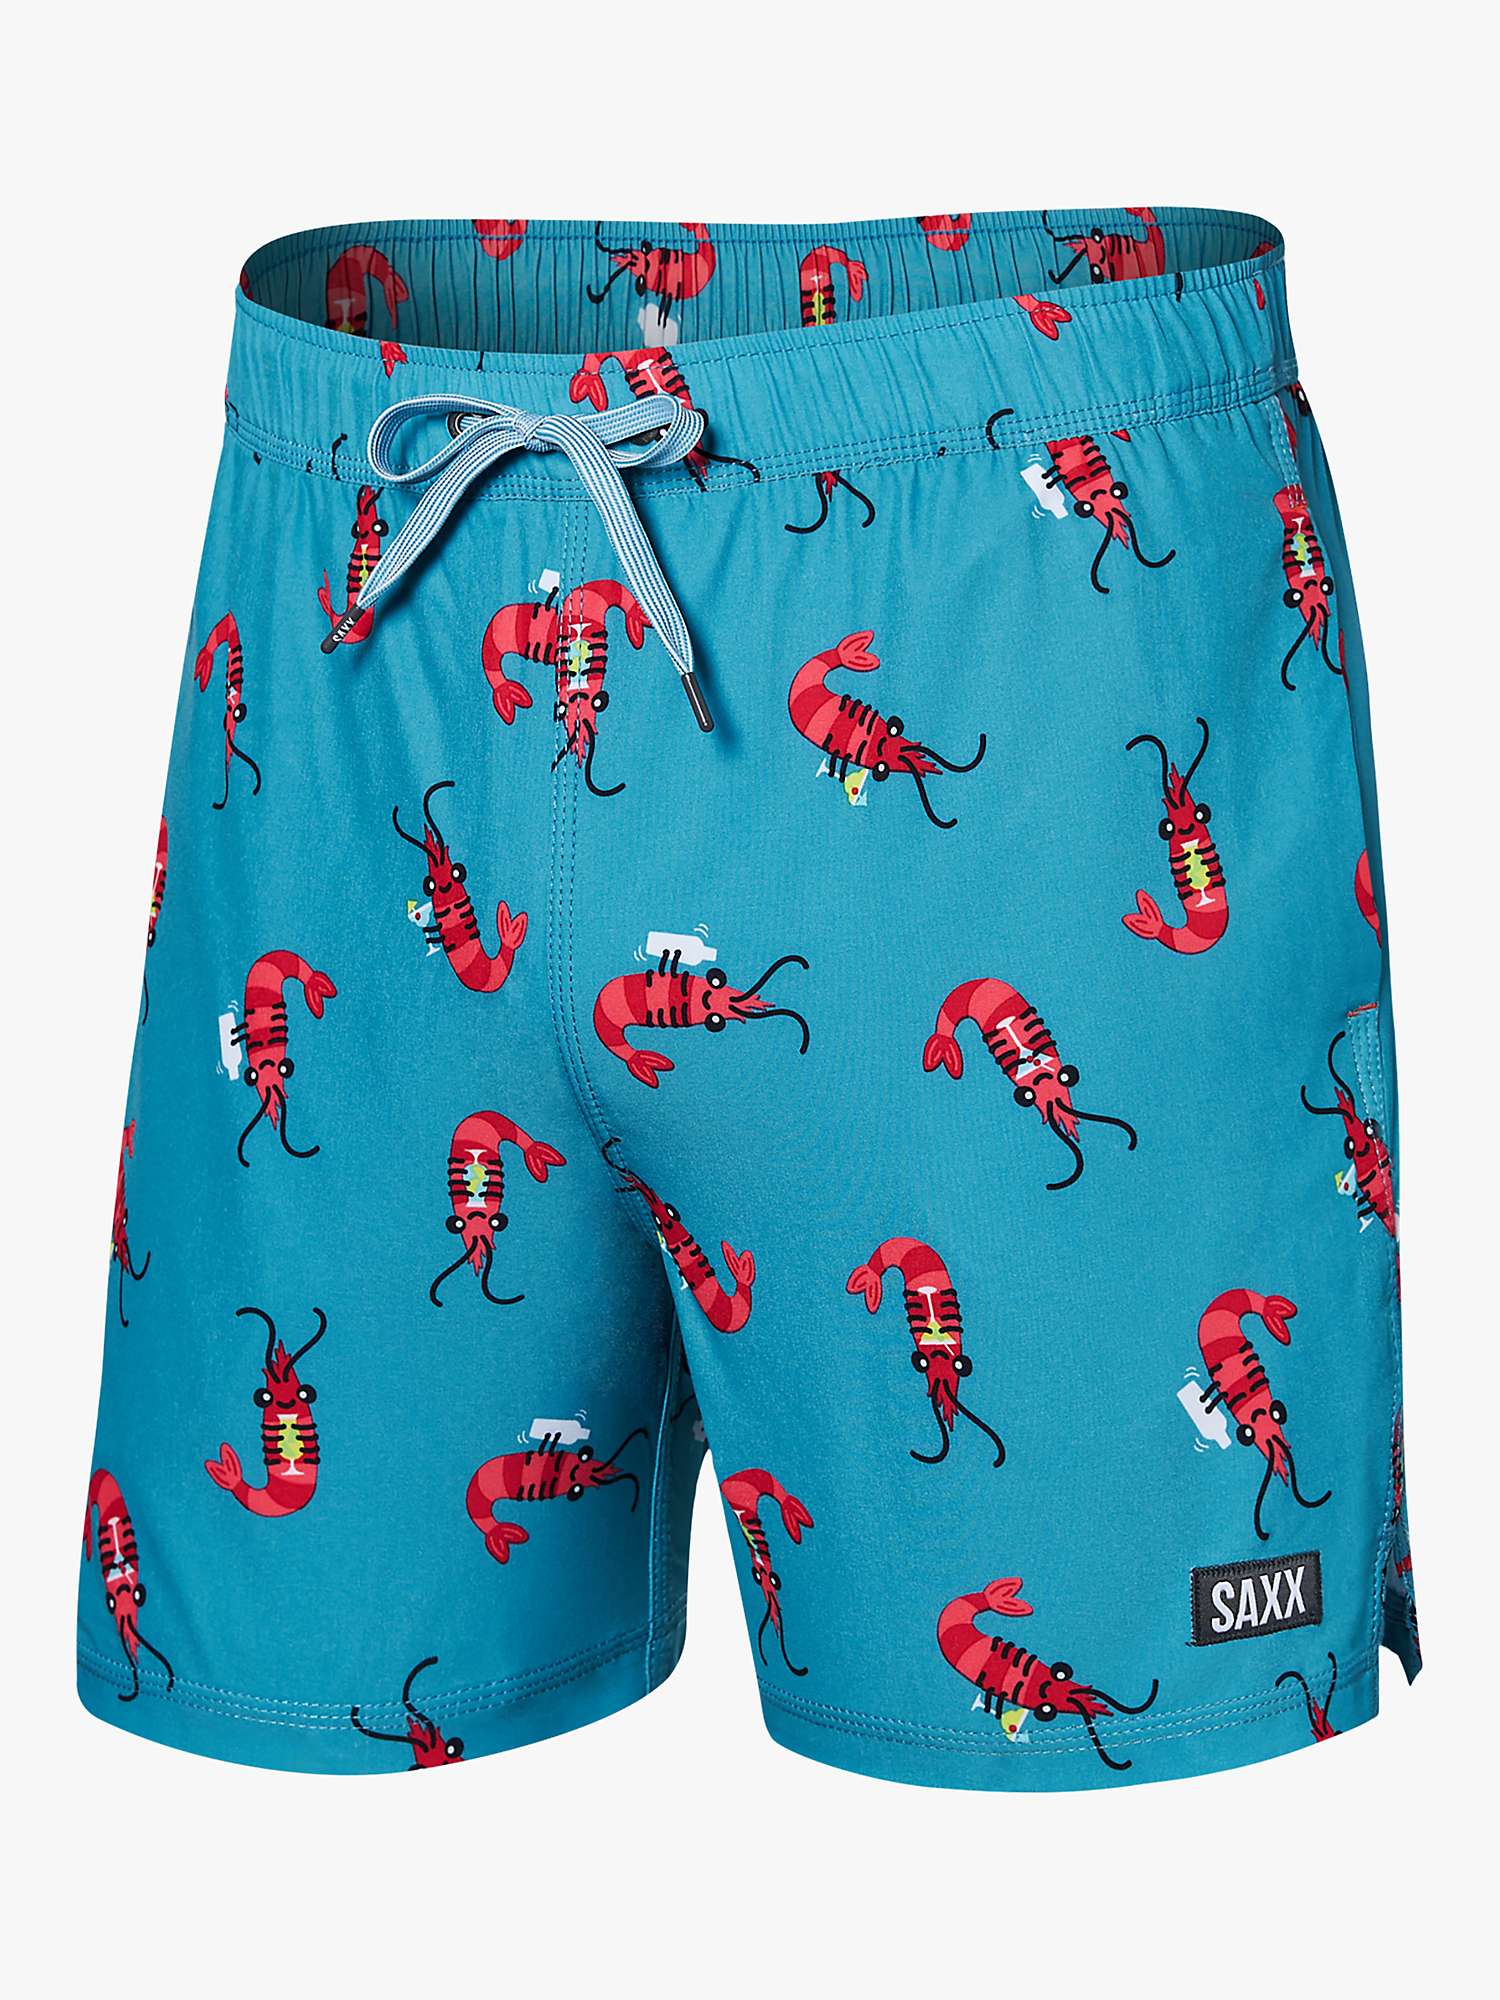 Buy SAXX Oh Buoy 2-in-1 Swim Shorts, Blue/Multi Online at johnlewis.com